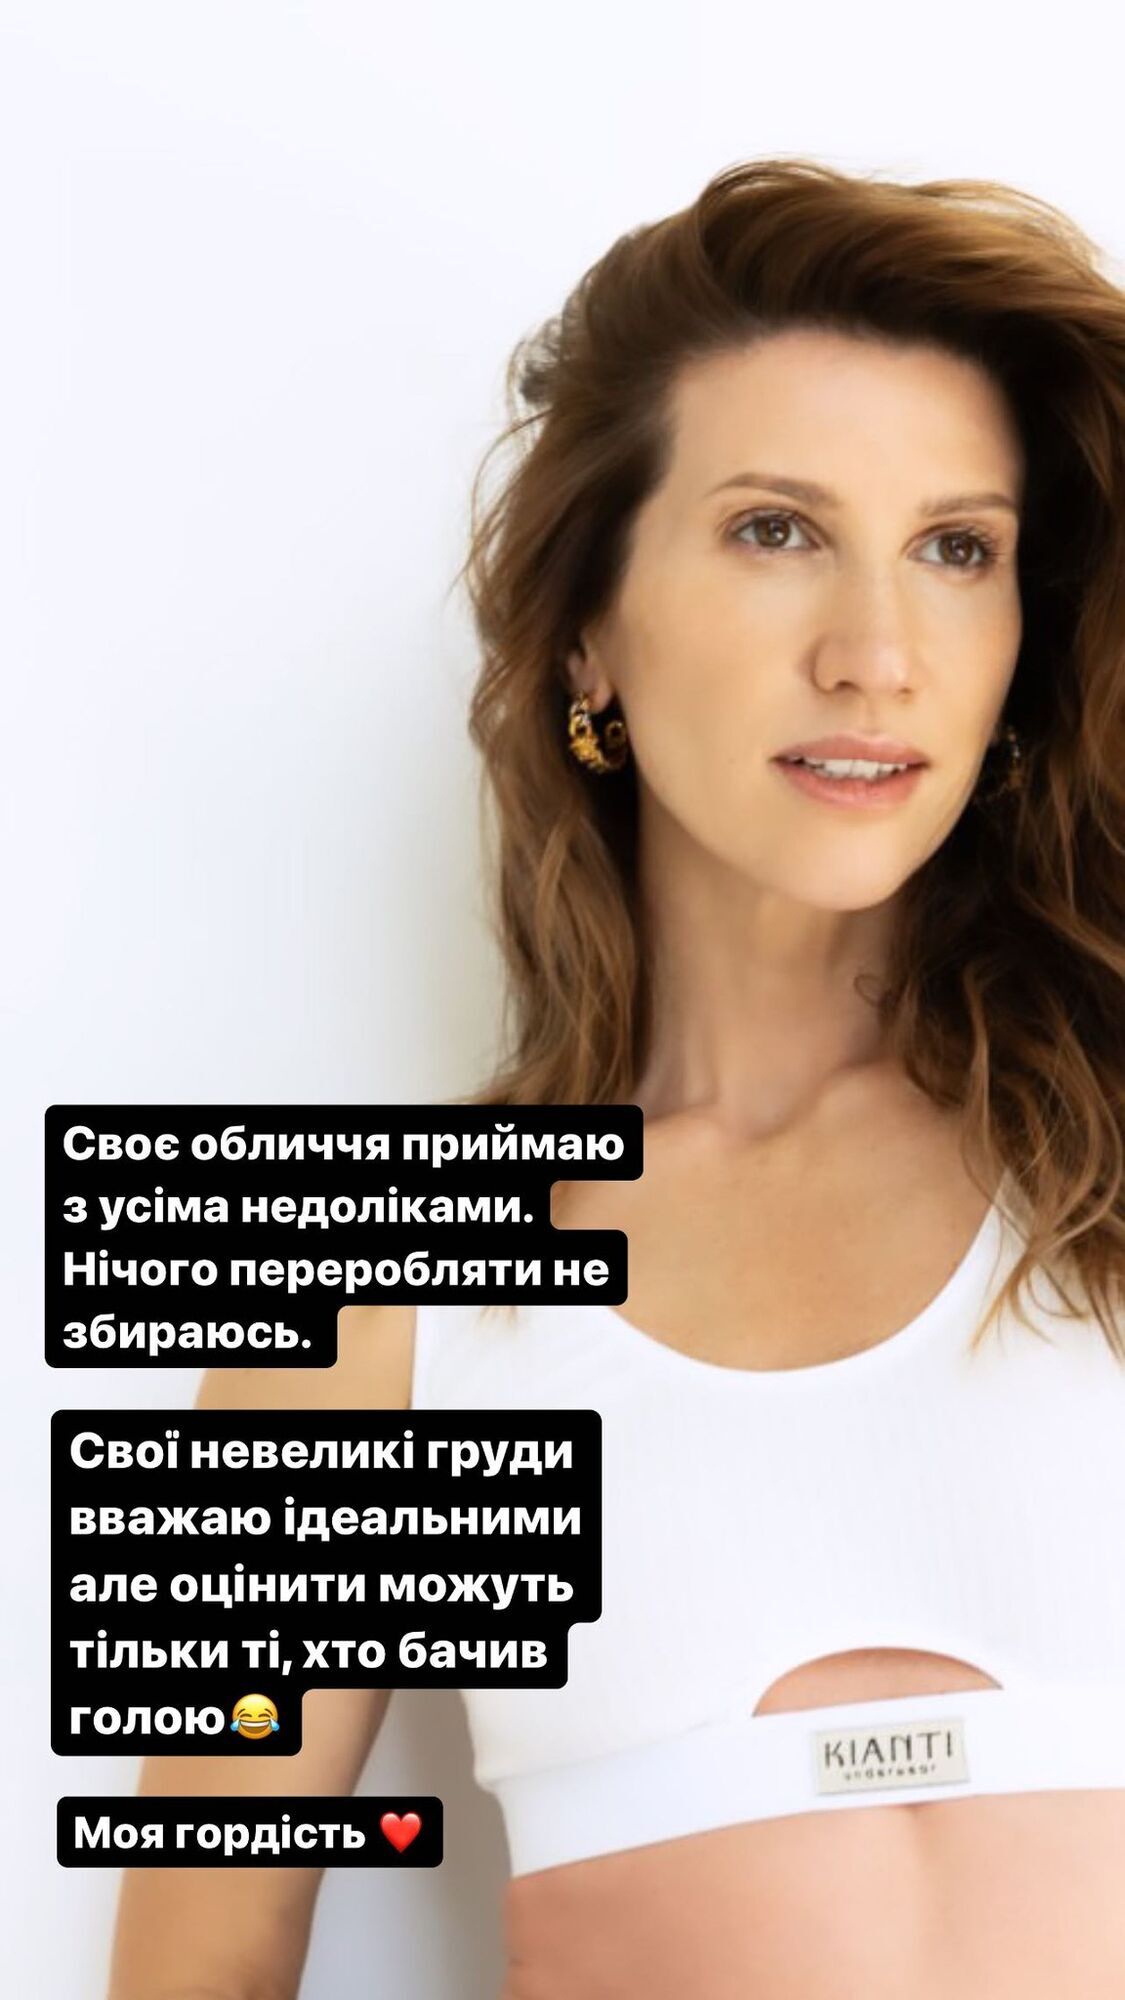 Anita Lutsenko spoke frankly about beauty injections and called her ''small breasts'' perfect